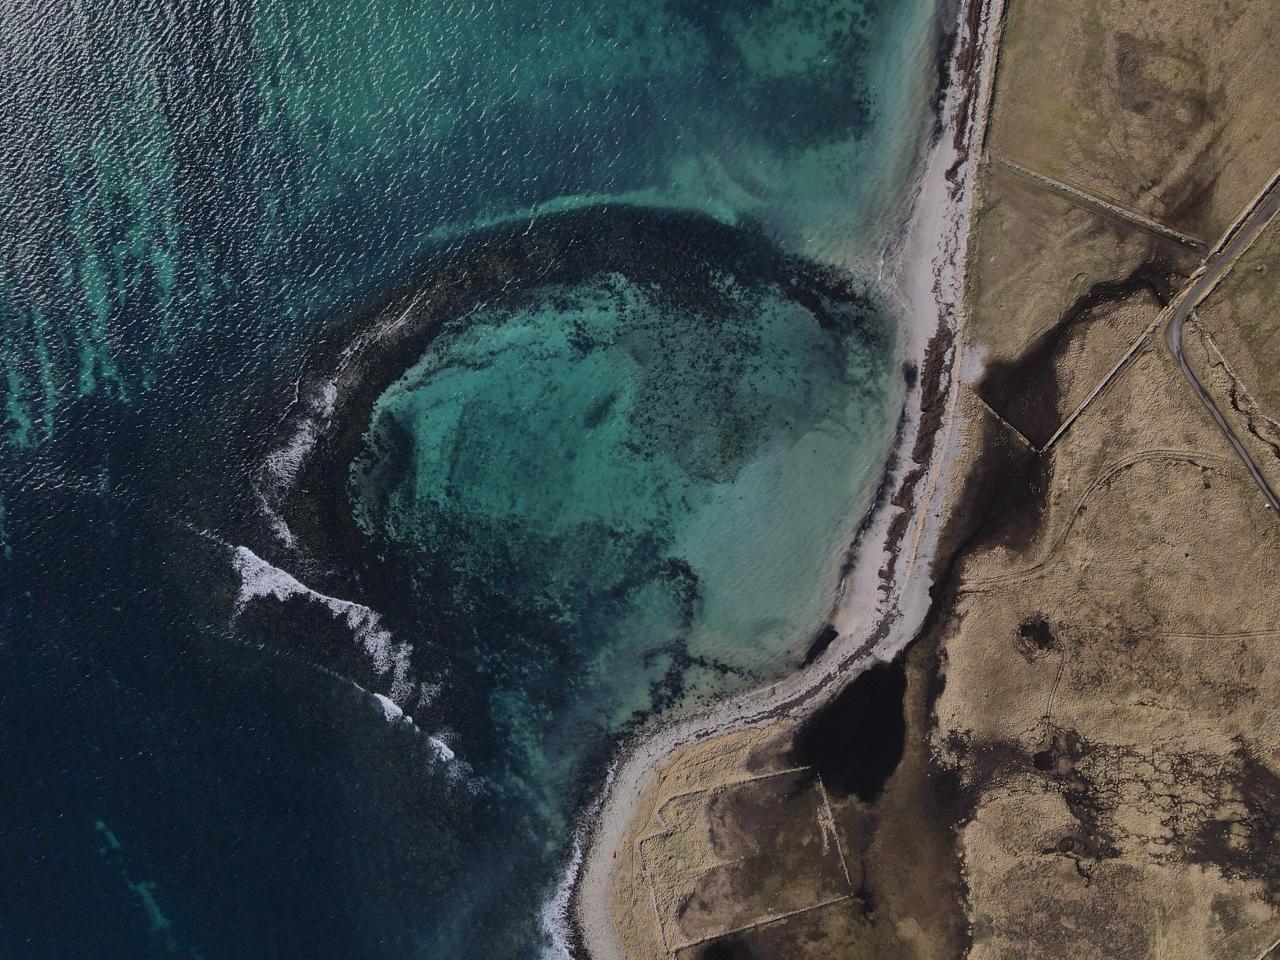 Aerial view of Weelie's Taing, Papa Westray, showing a tidal pool shore feature. Image courtesy and Copyright of Jonathan Ford.